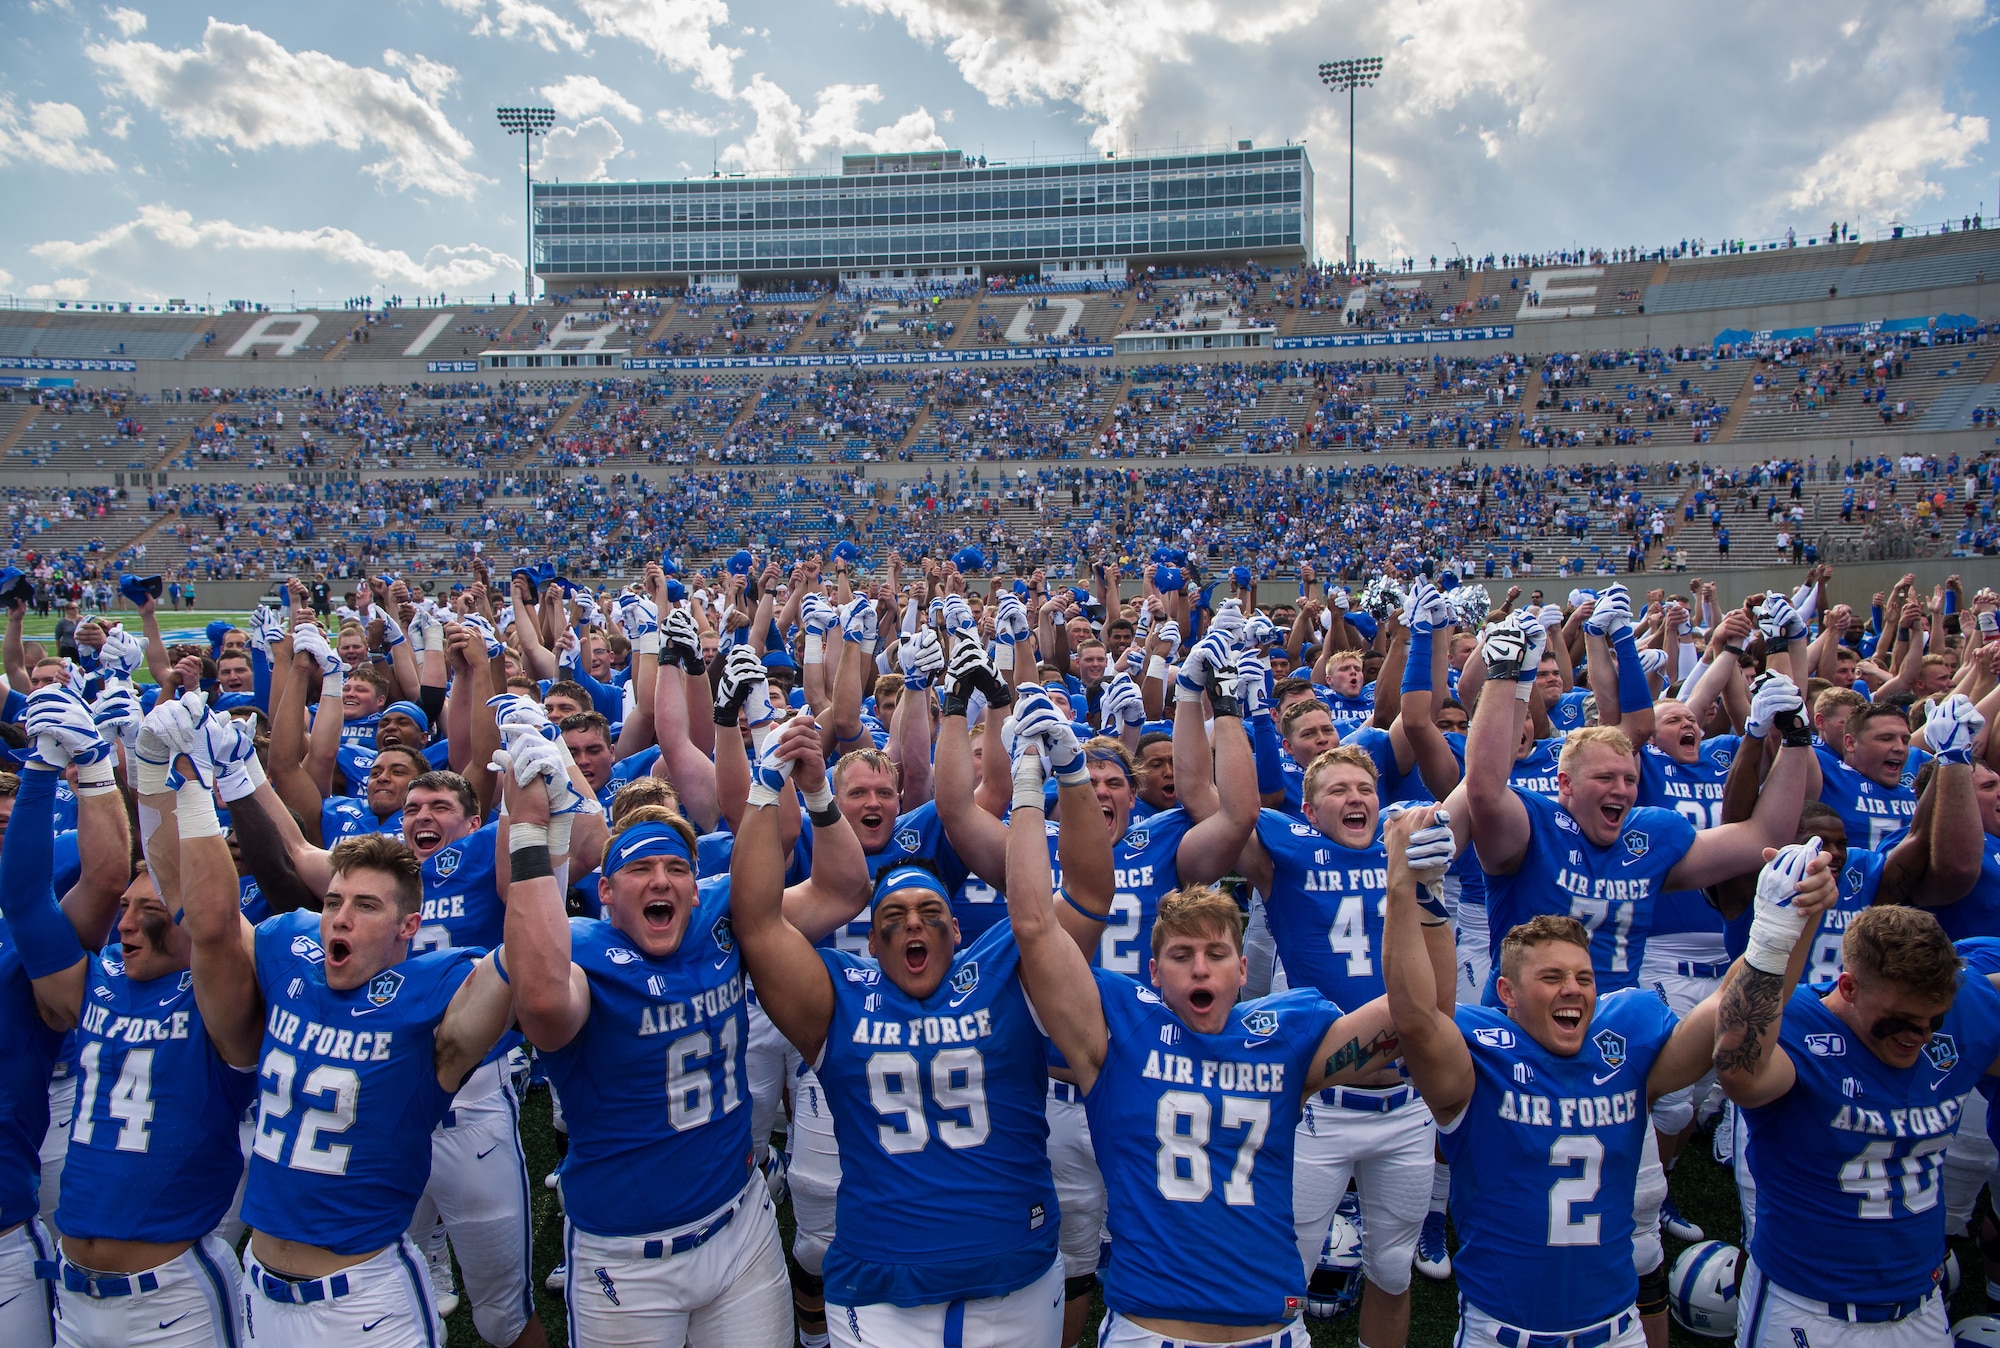 U.S. Air Force Academy football players raise their hands in victory